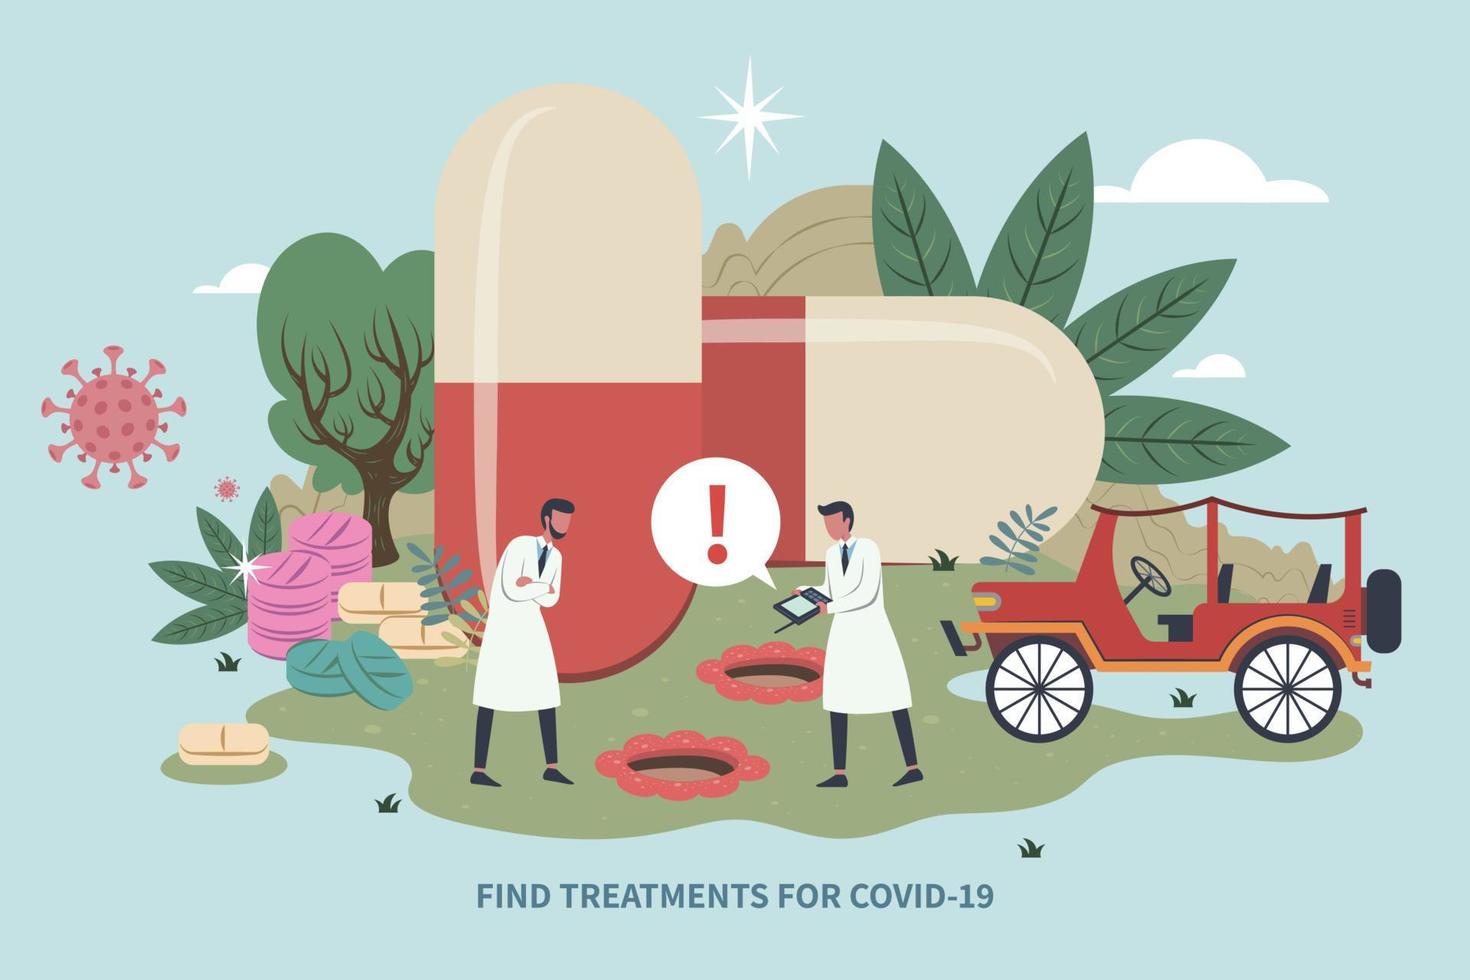 Scientists keep searching new treatments for COVID-19 flat design conceptual illustration, Giant capsules and pills in the garden behind medical staffs vector